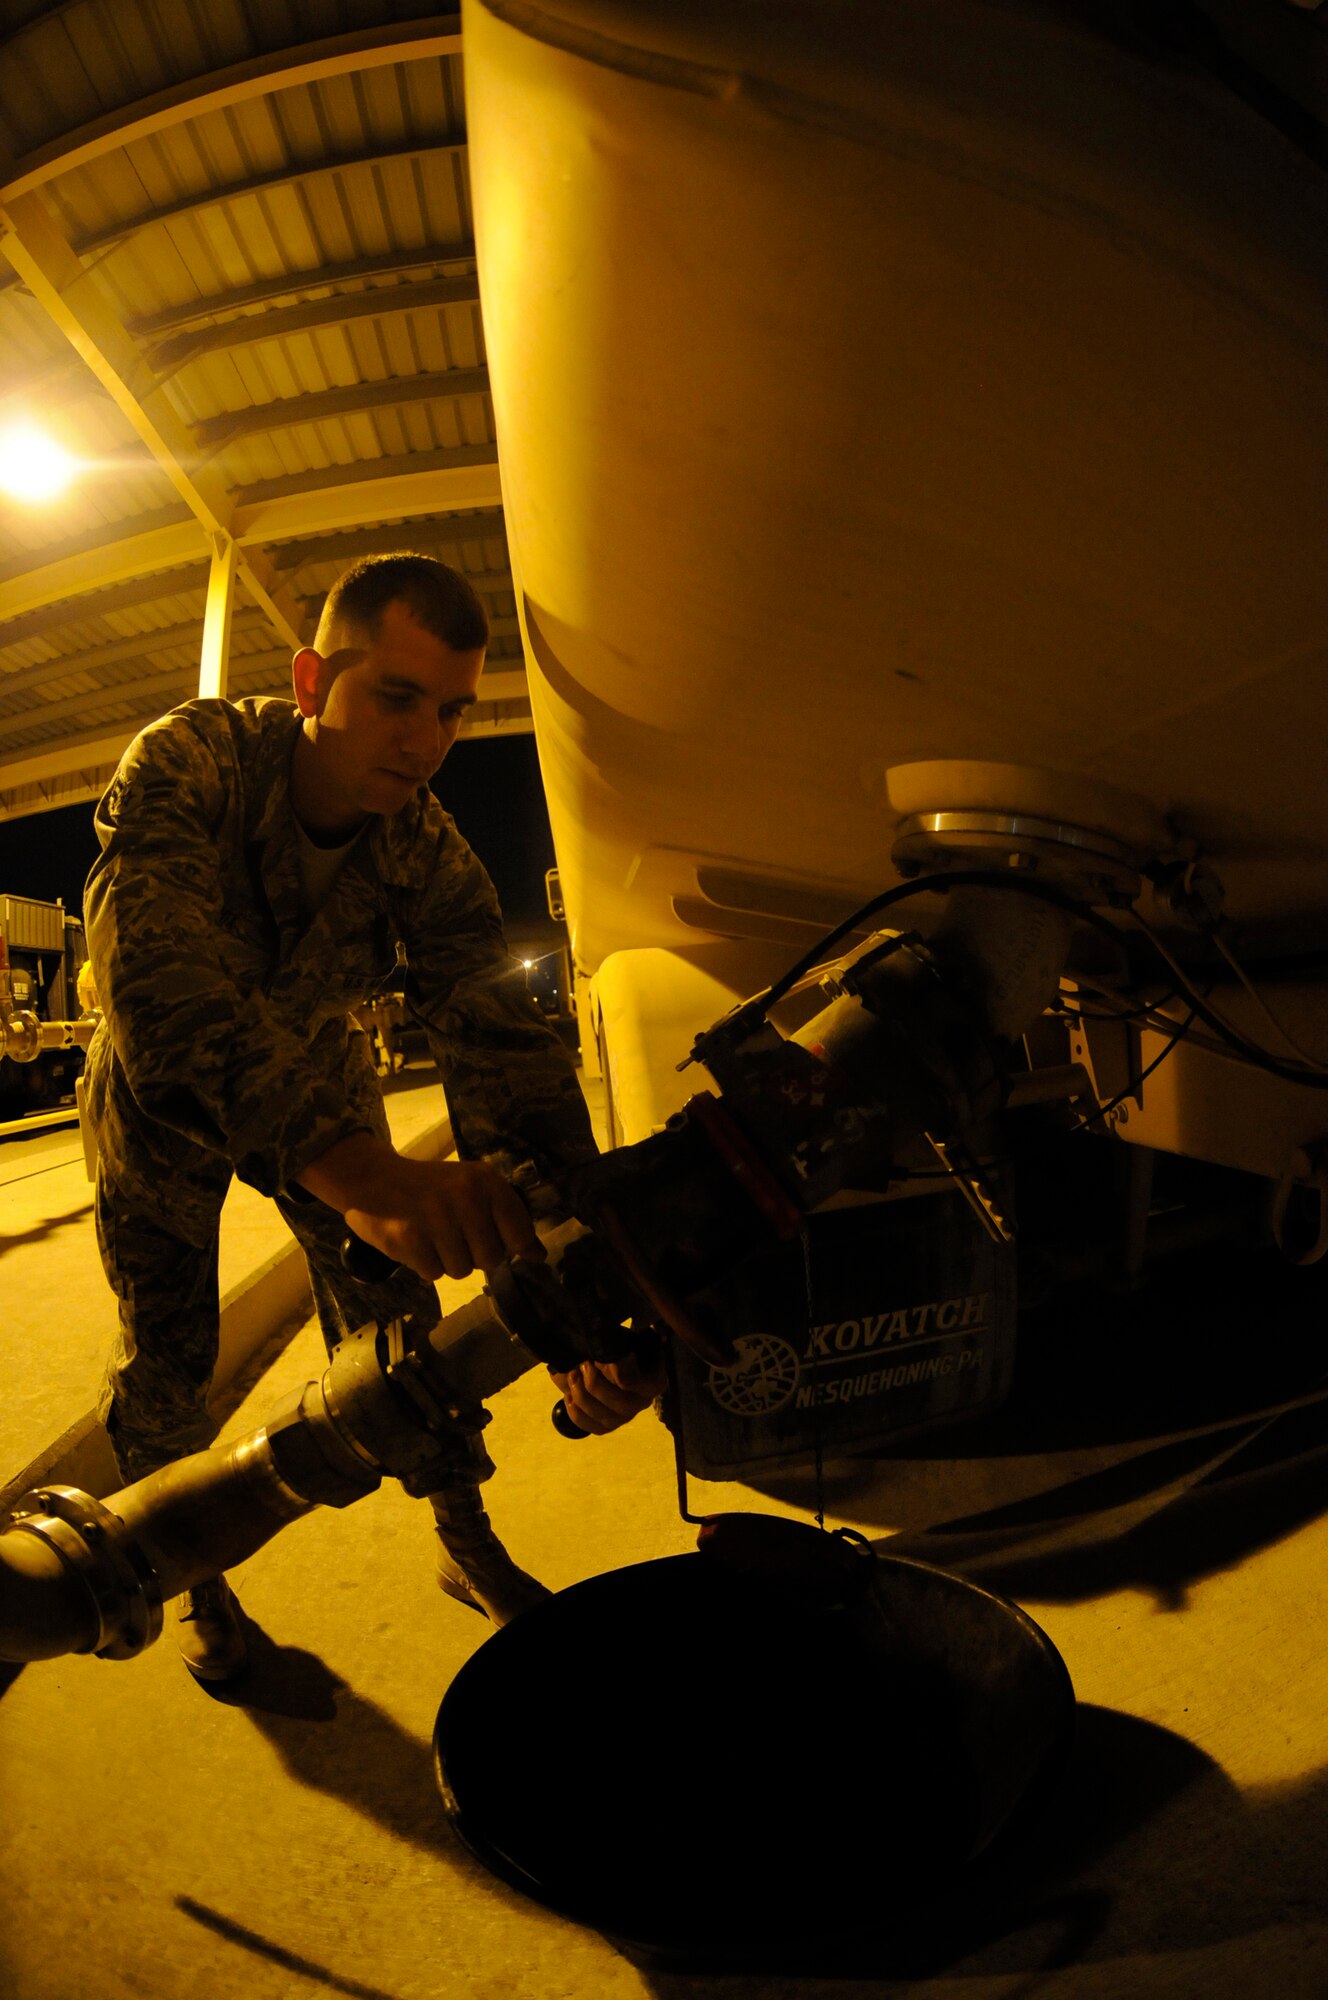 Airman 1st Class Deron Hix, fuels apprentice assigned to the 379th Expeditionary Logistics Readiness Squadron, uses a pantograph extension to fill an R-11 refueling truck so it can refuel aircraft Nov. 5, at an undisclosed air base in Southwest Asia. These 379th ELRS members fuel the fight by transferring approximately one million gallons of jet fuel per day, keeping all aircraft fueled and prepared for flight to support the Global War on Terrorism. Airman Hix, a native of Indianapolis, Ind., is deployed from Moody Air Force Base, Ga., in support of Operations Iraqi and Enduring Freedom and Joint Task Force-Horn of Africa. (U.S. Air Force photo by Staff Sgt. Darnell T. Cannady/Released)